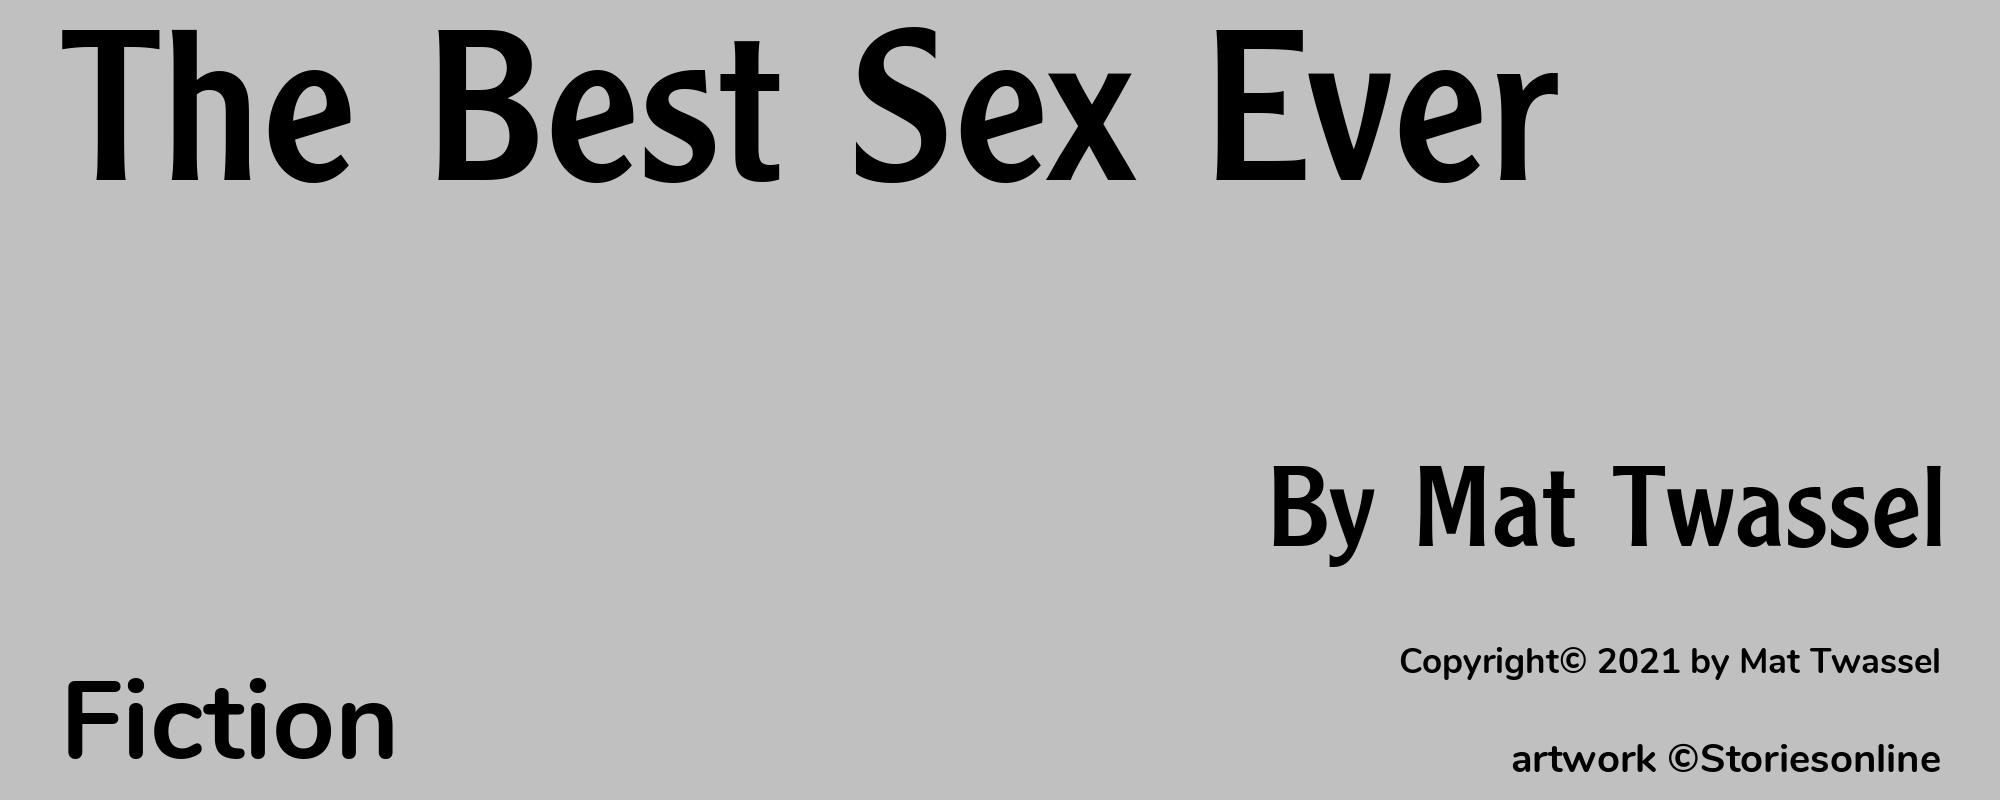 The Best Sex Ever - Cover